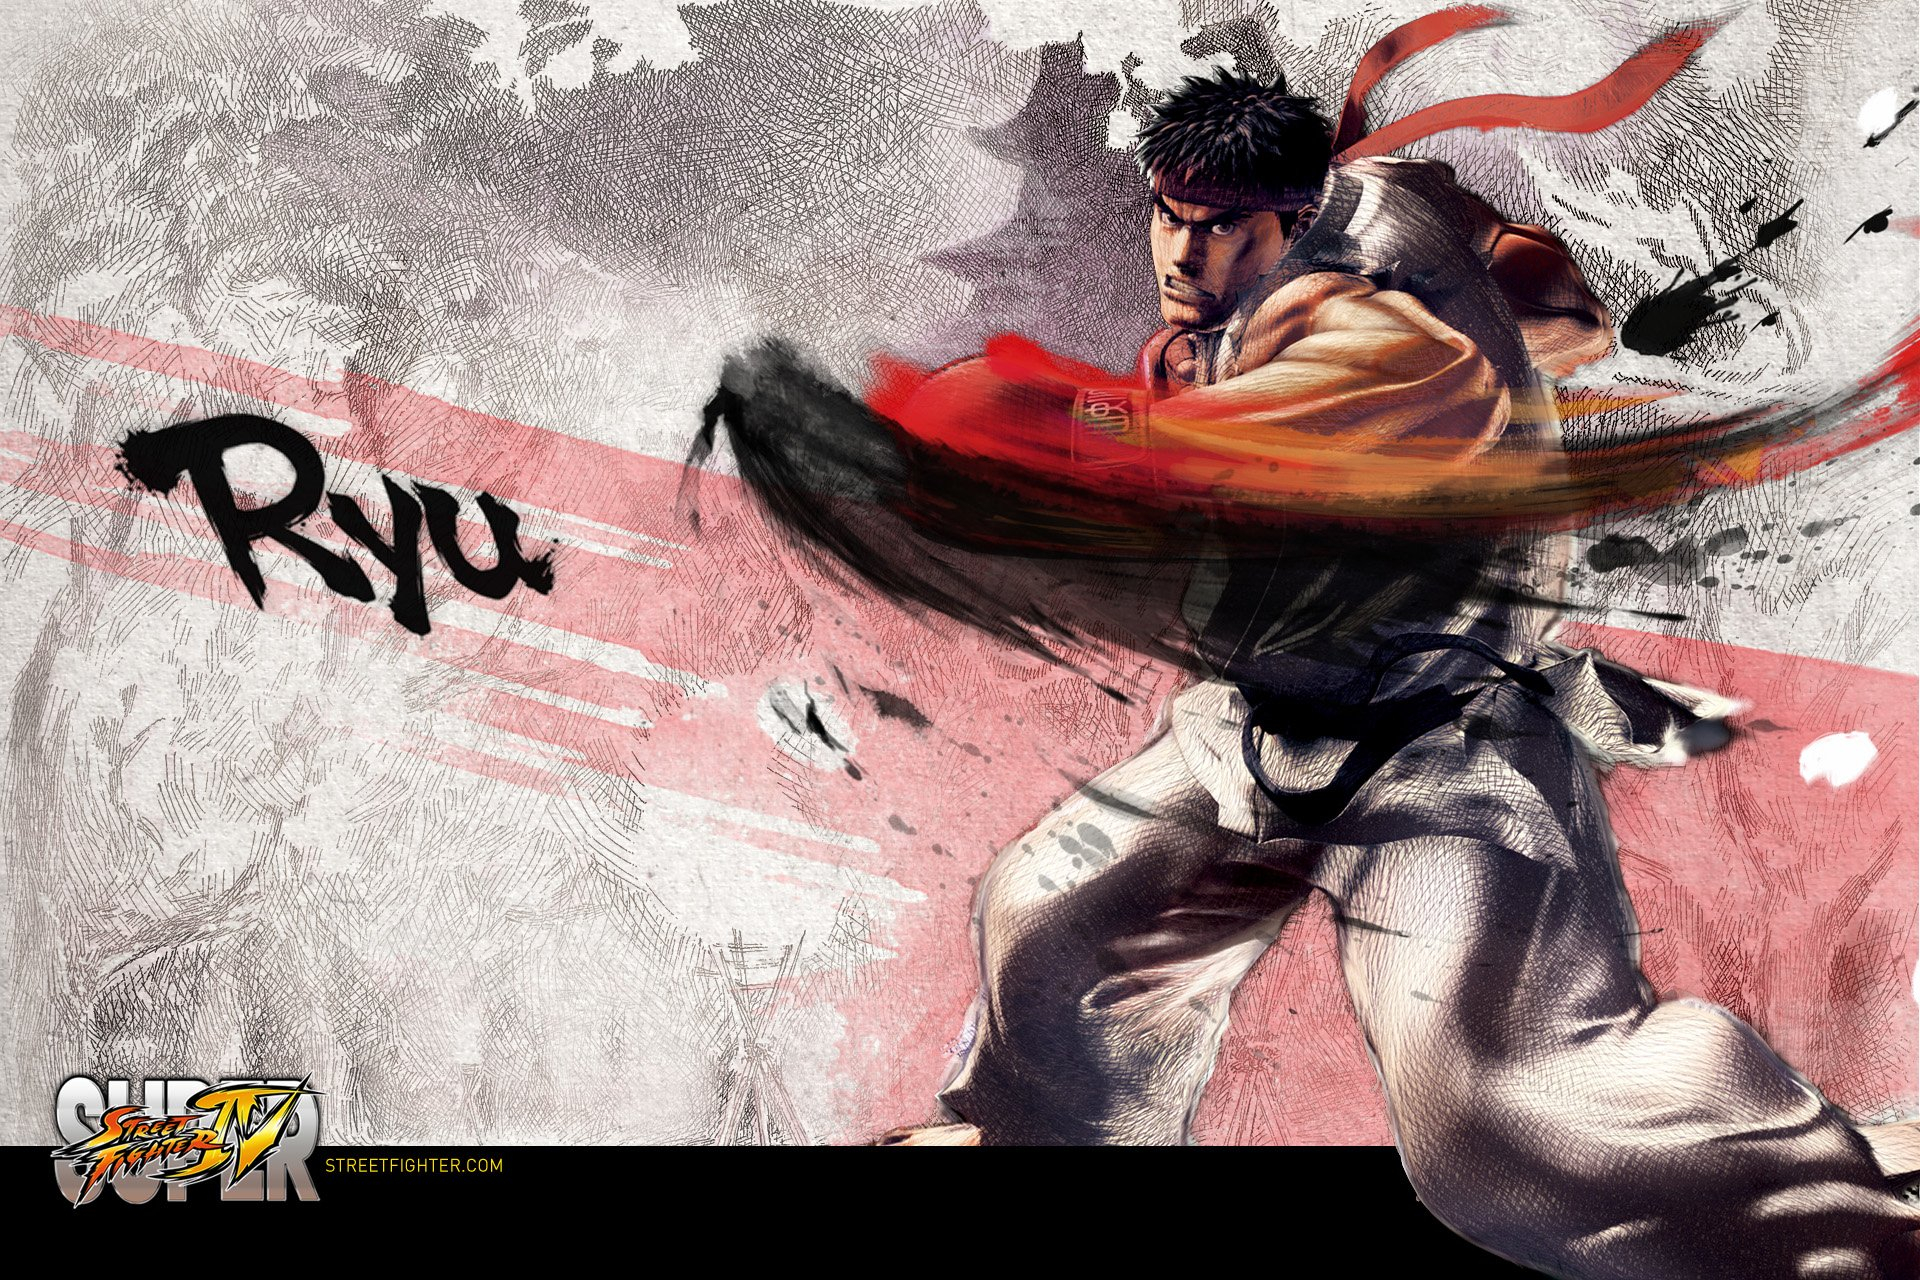 1920x1280 10+ Super Street Fighter IV HD Wallpapers and Backgrounds